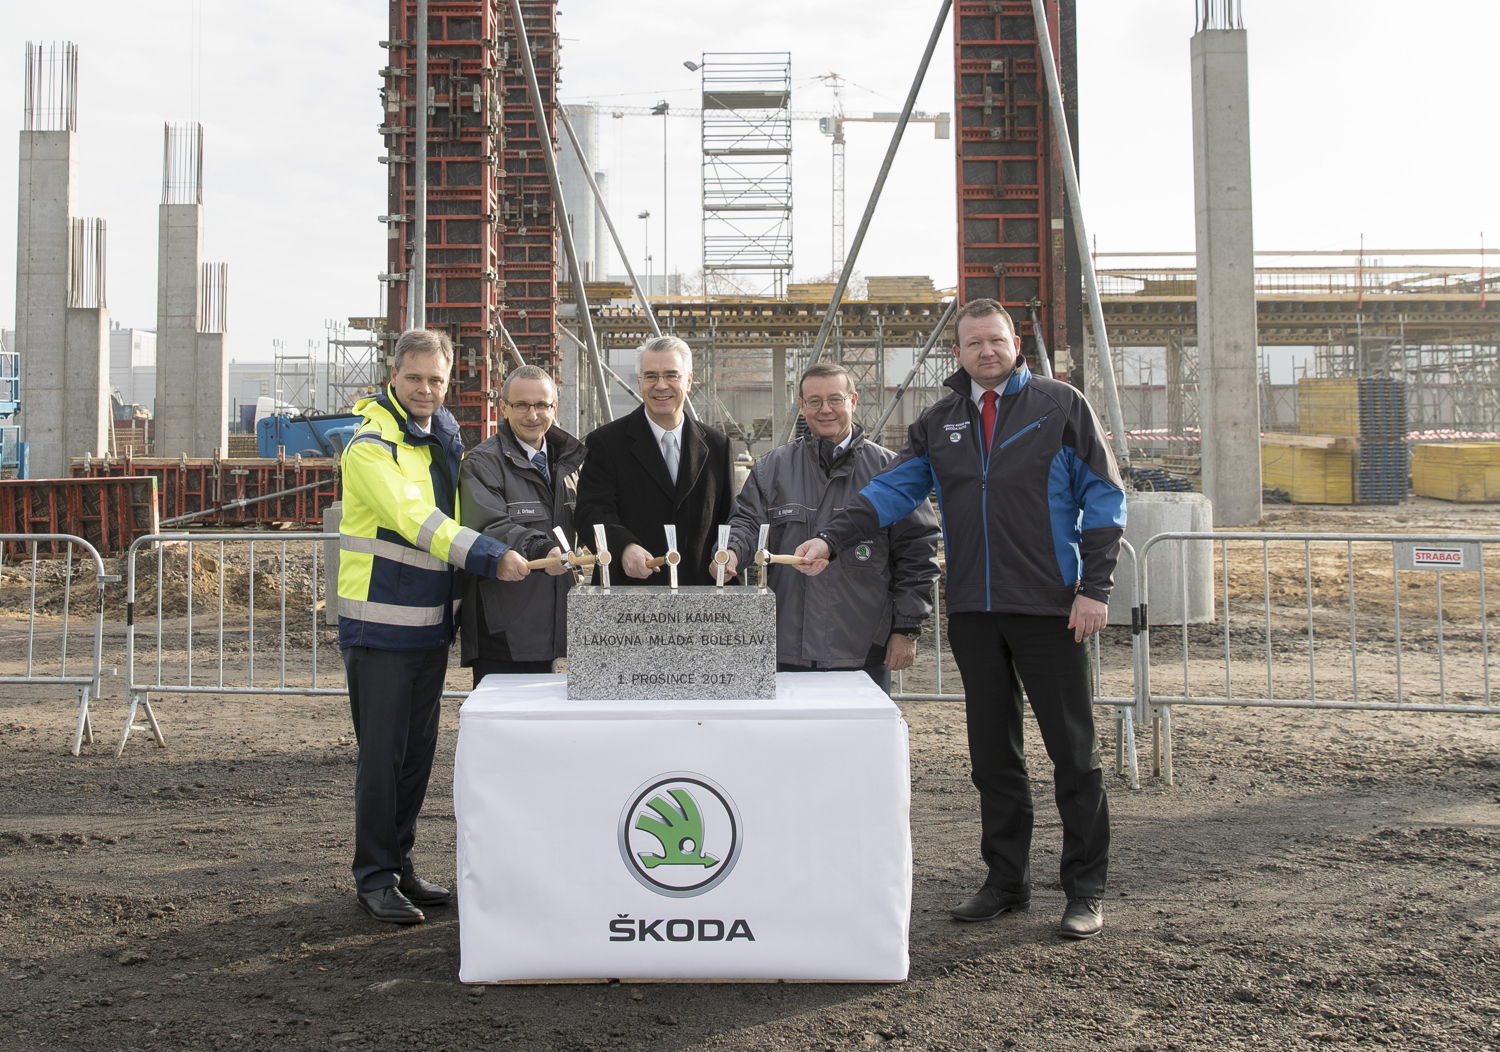 On Friday 1 December 2017, ŠKODA AUTO Board Member for Production and Logistics Michael Oeljeklaus, ŠKODA AUTO Board Member for Human Resources Bohdan Wojnar, and Deputy Chairman of the KOVO Union’s MB branch Josef Zmrhal, laid the foundation for a new paint shop in Mladá Boleslav.